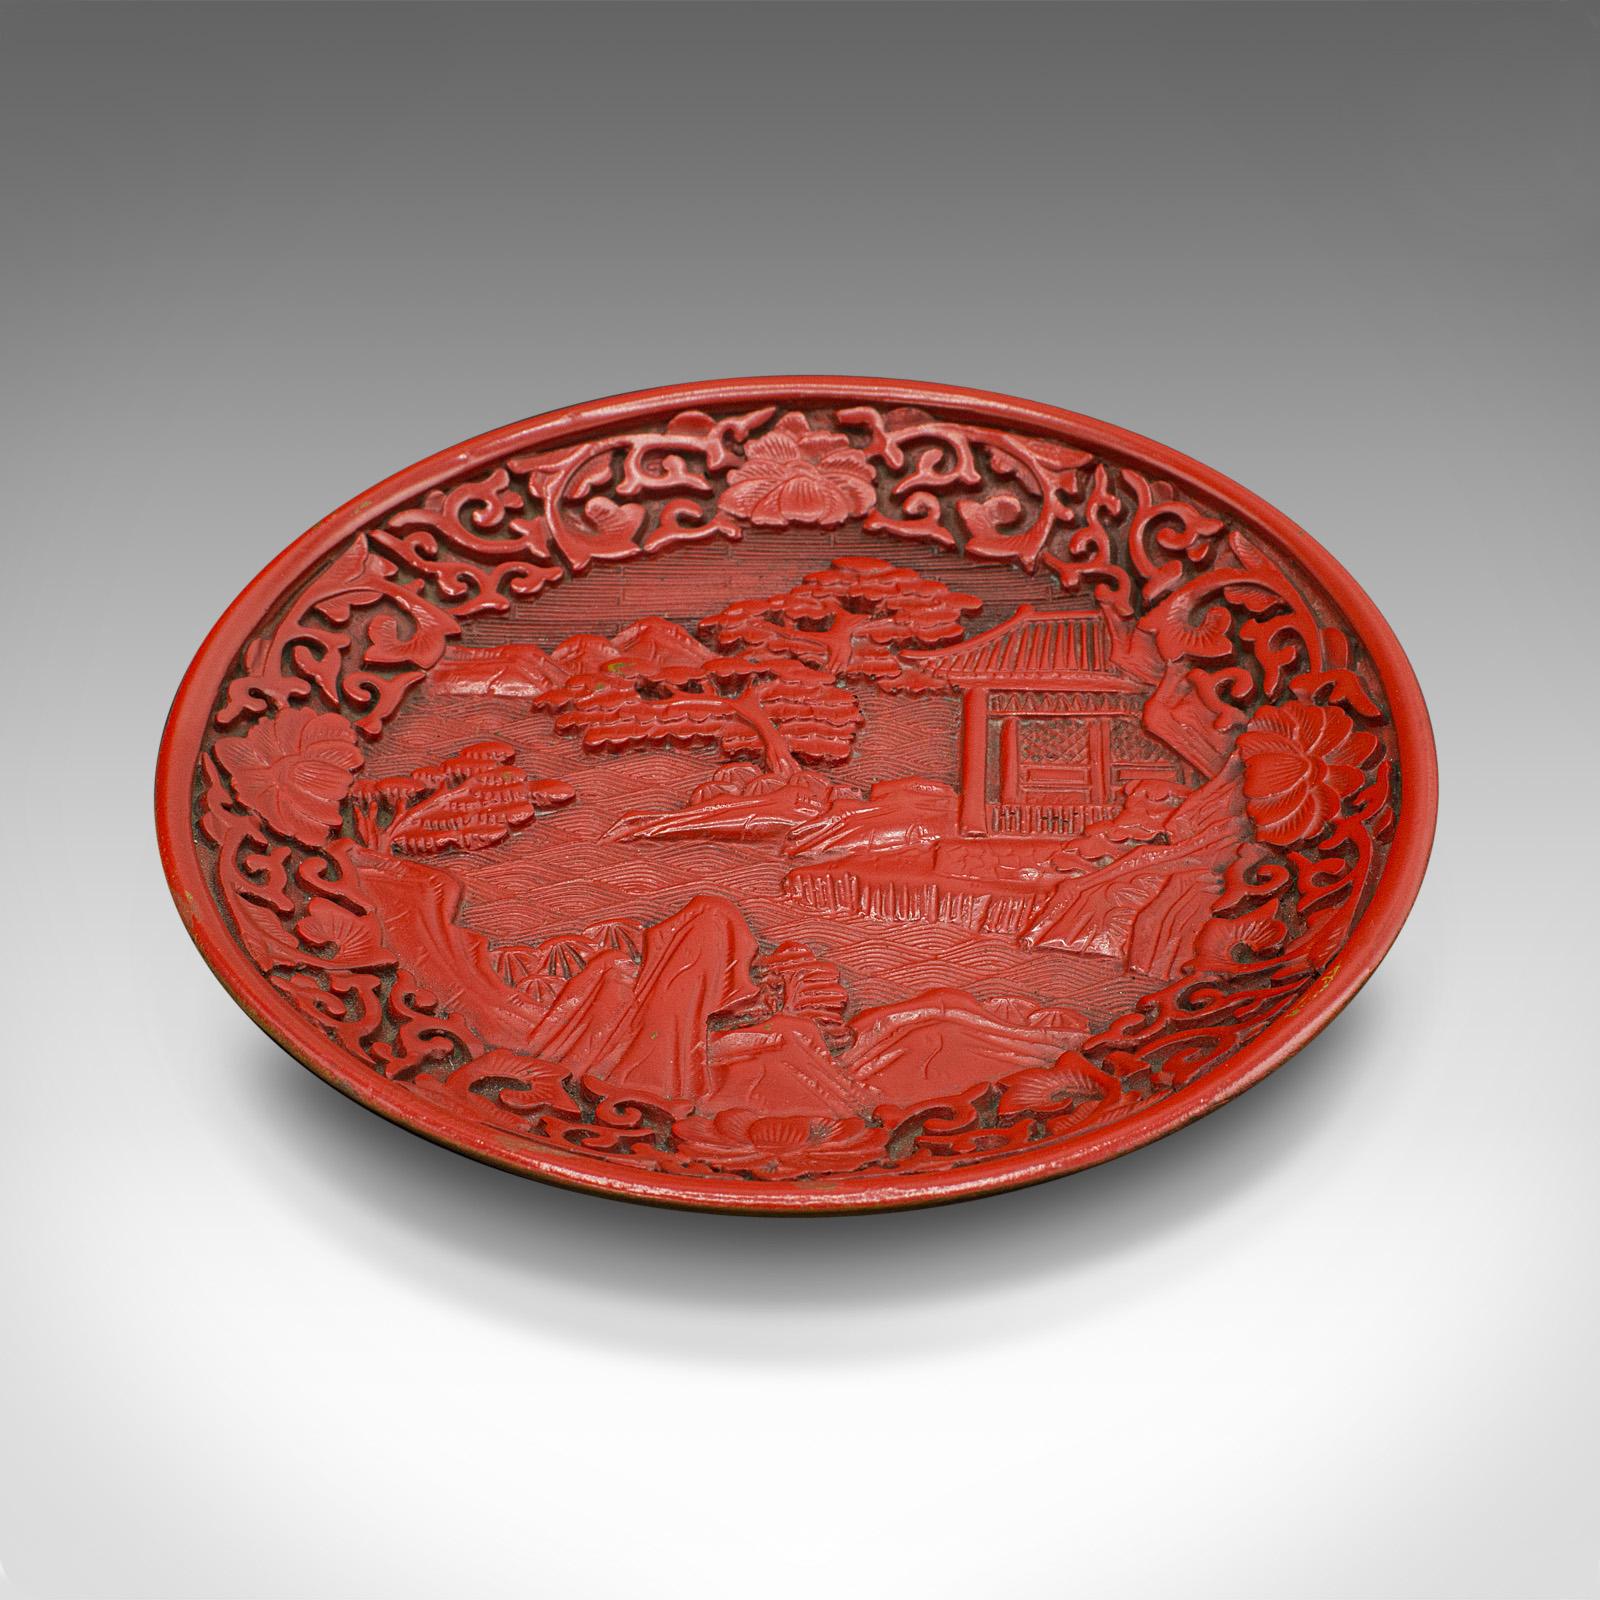 This is a small antique decorative Cinnabar dish. A Chinese, red lacquer display plate, dating to the Qing dynasty, circa 1900.

Striking example of the distinctive Chinese decorative art.
Displays a desirable aged patina - in very good order.
A